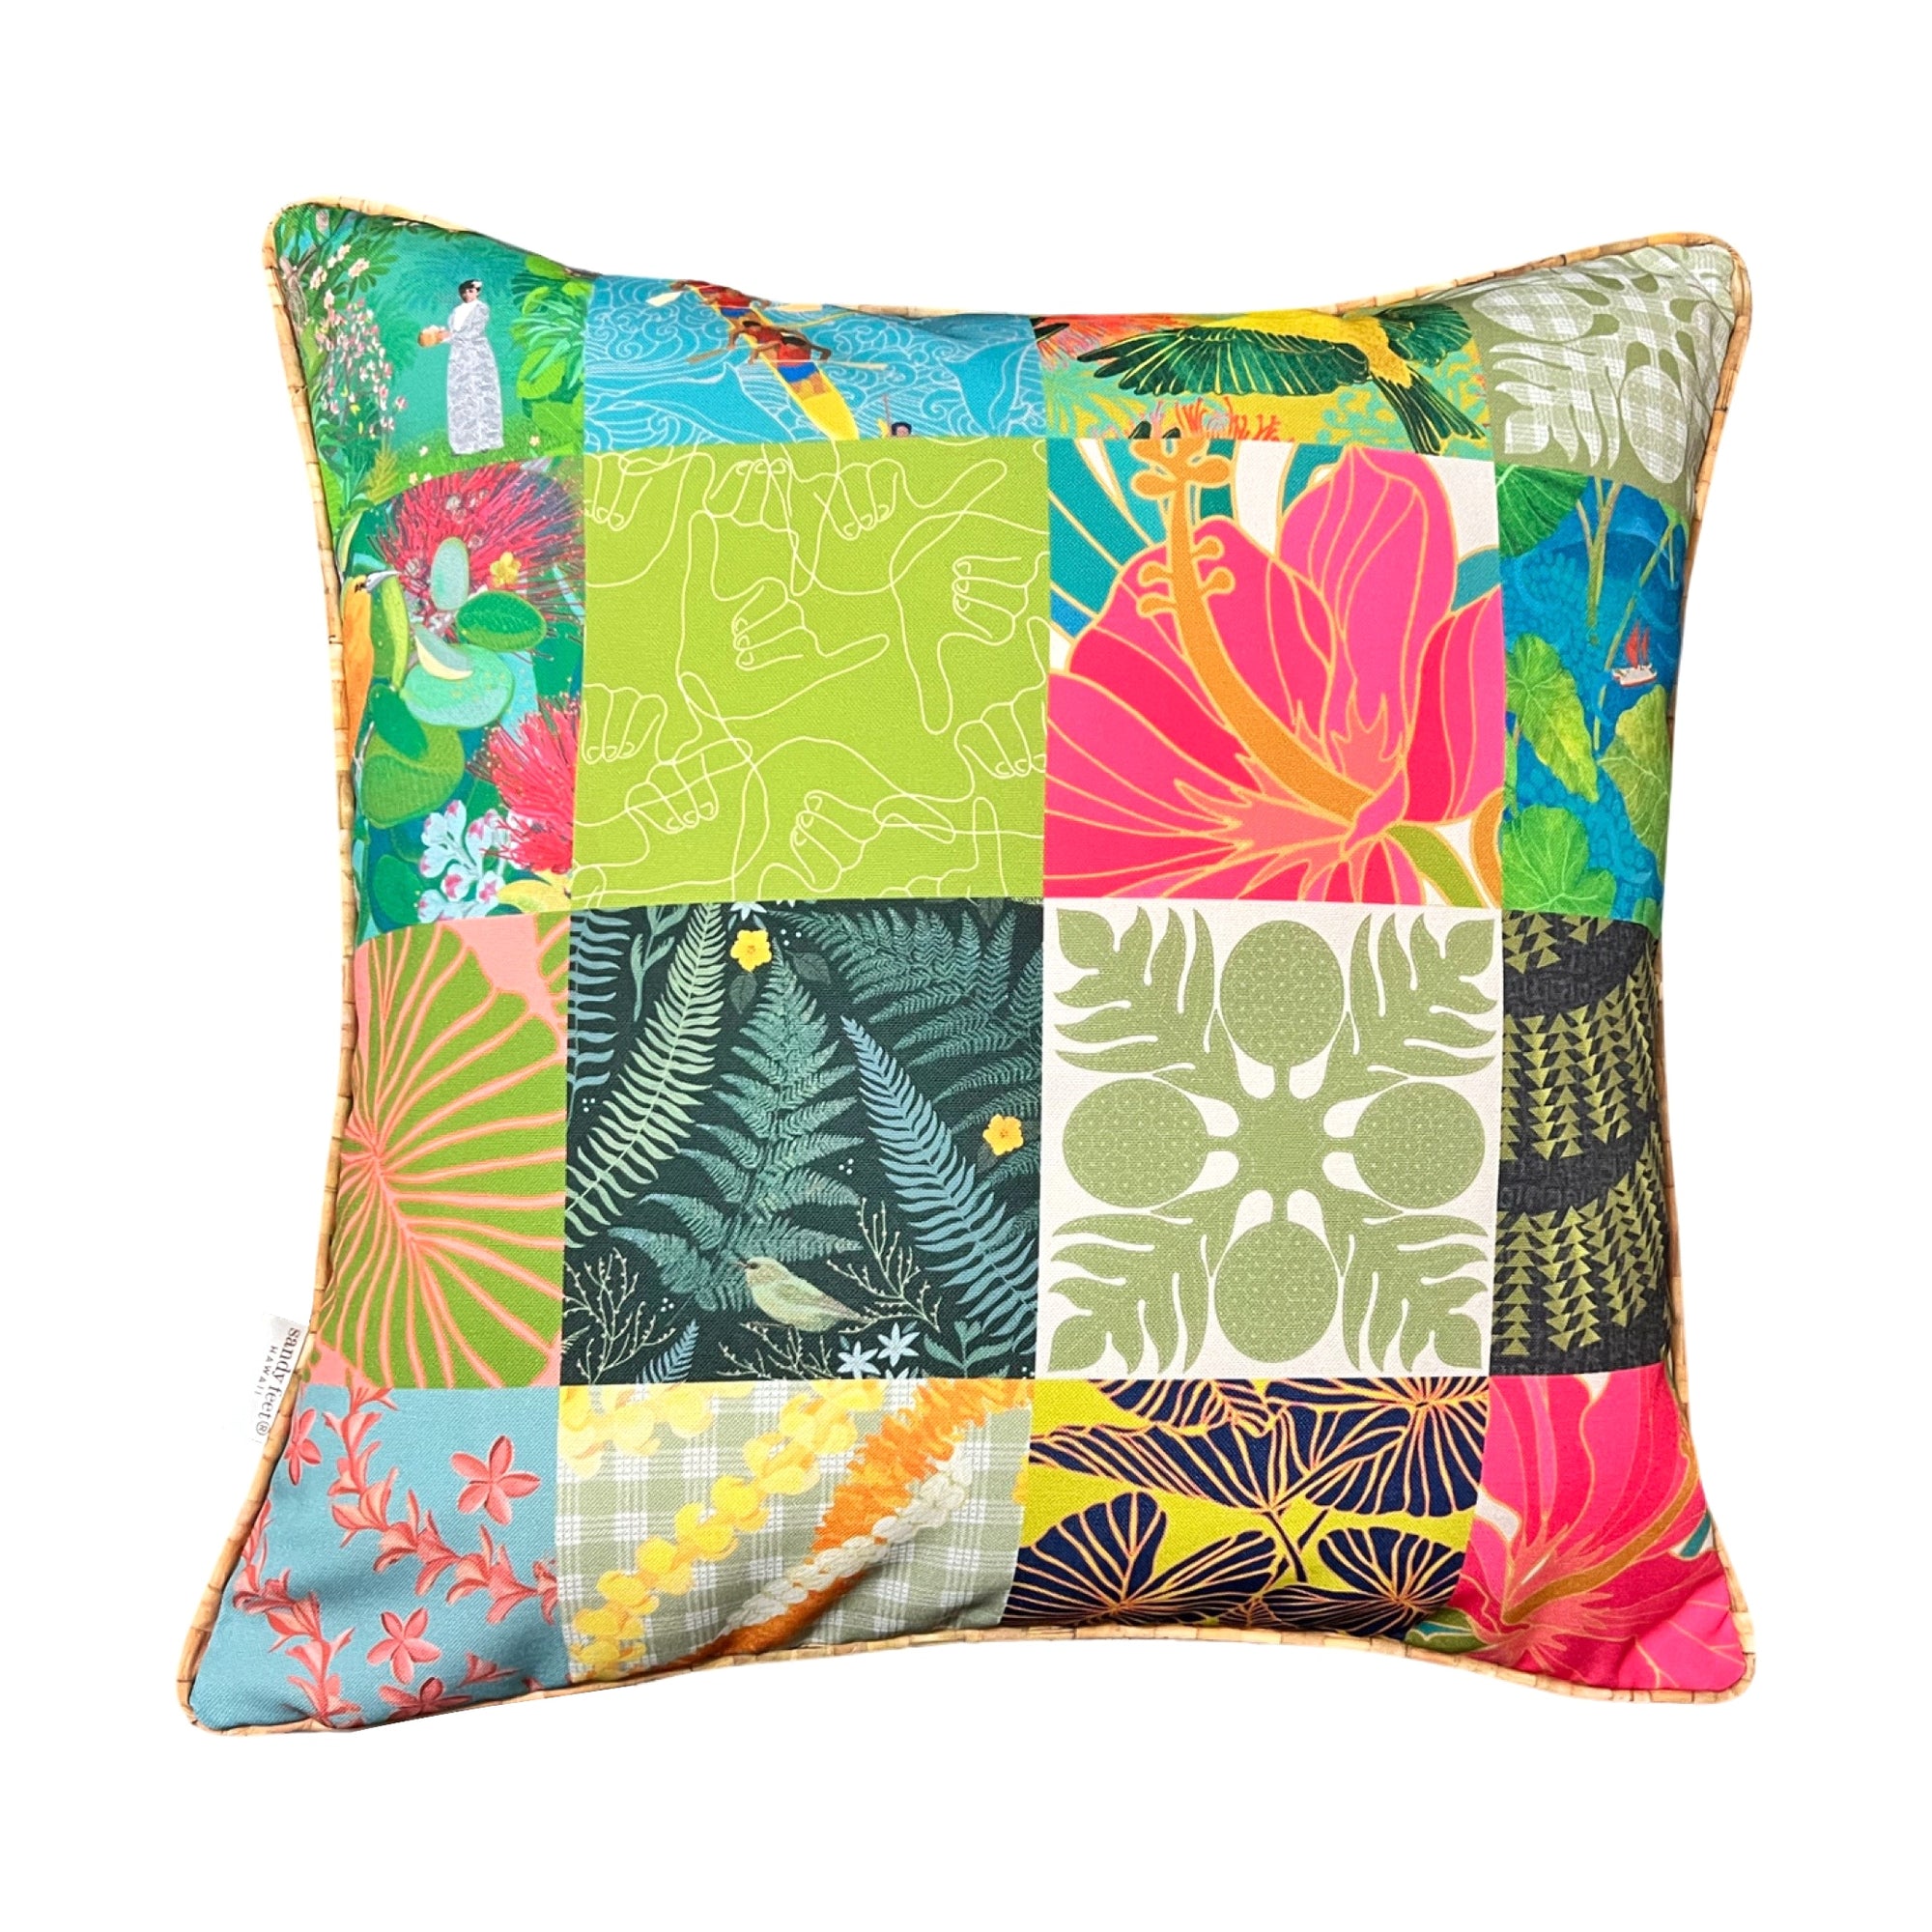 Printed Patchwork Green and Blue Pillow Cover